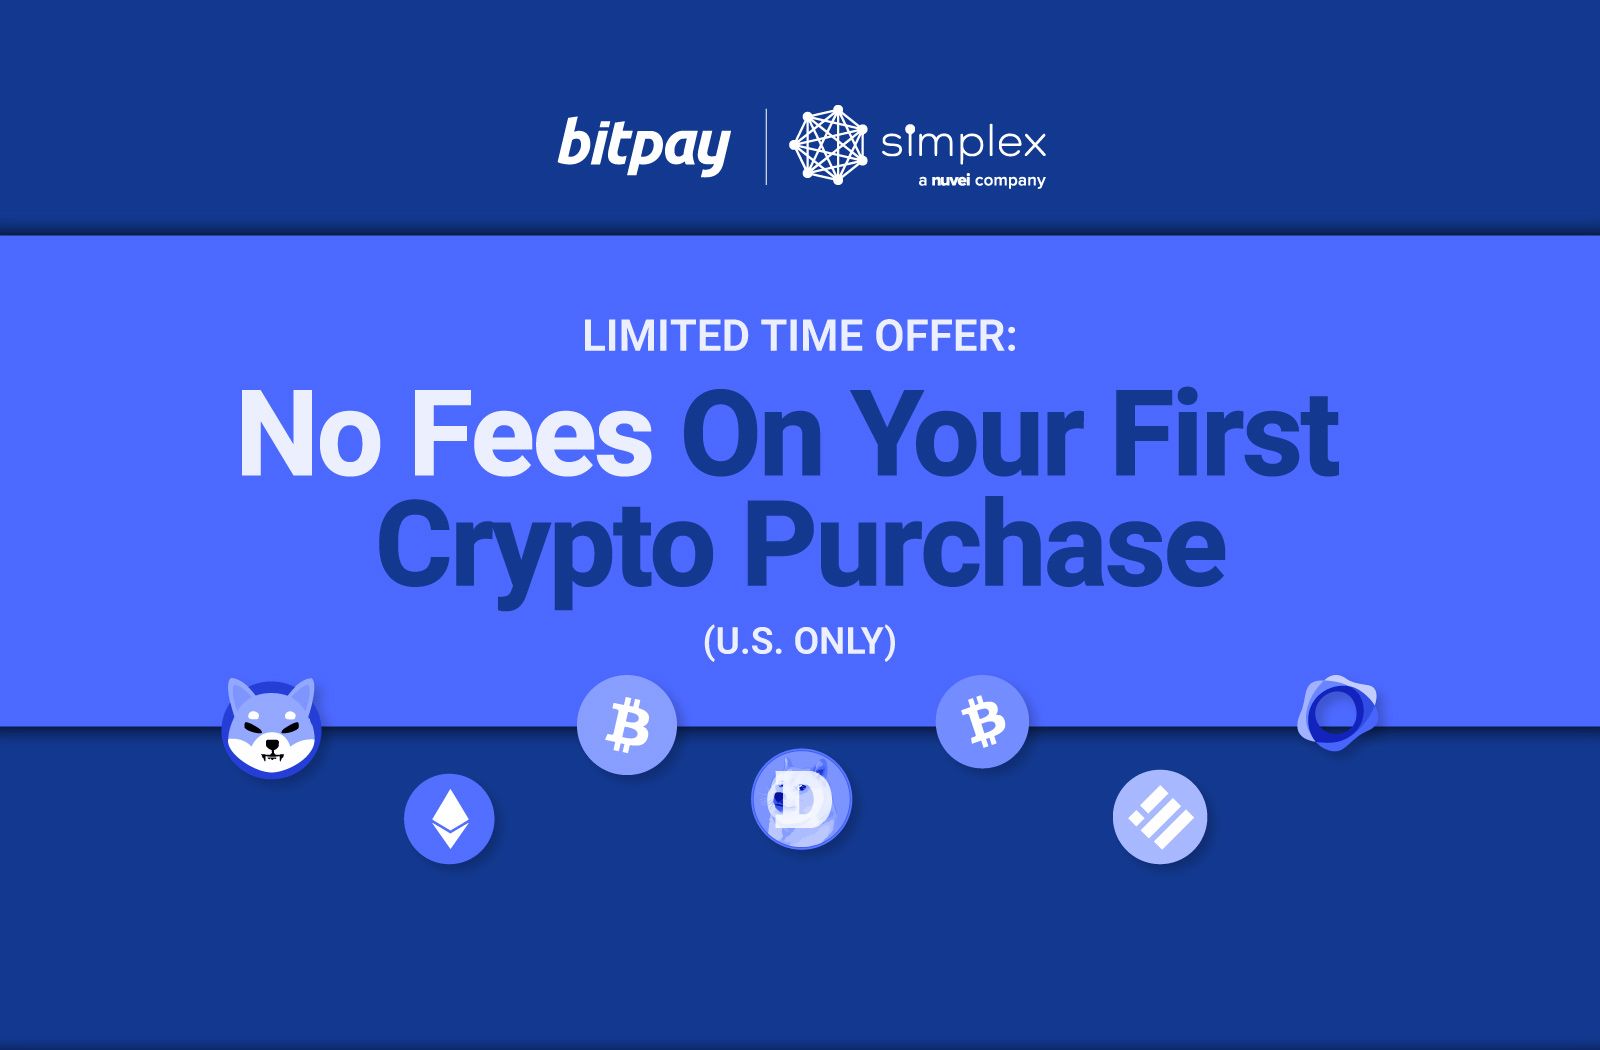 Limited Time Offer: Buy Crypto with No Fees in the BitPay app, Exclusively for U.S. Residents